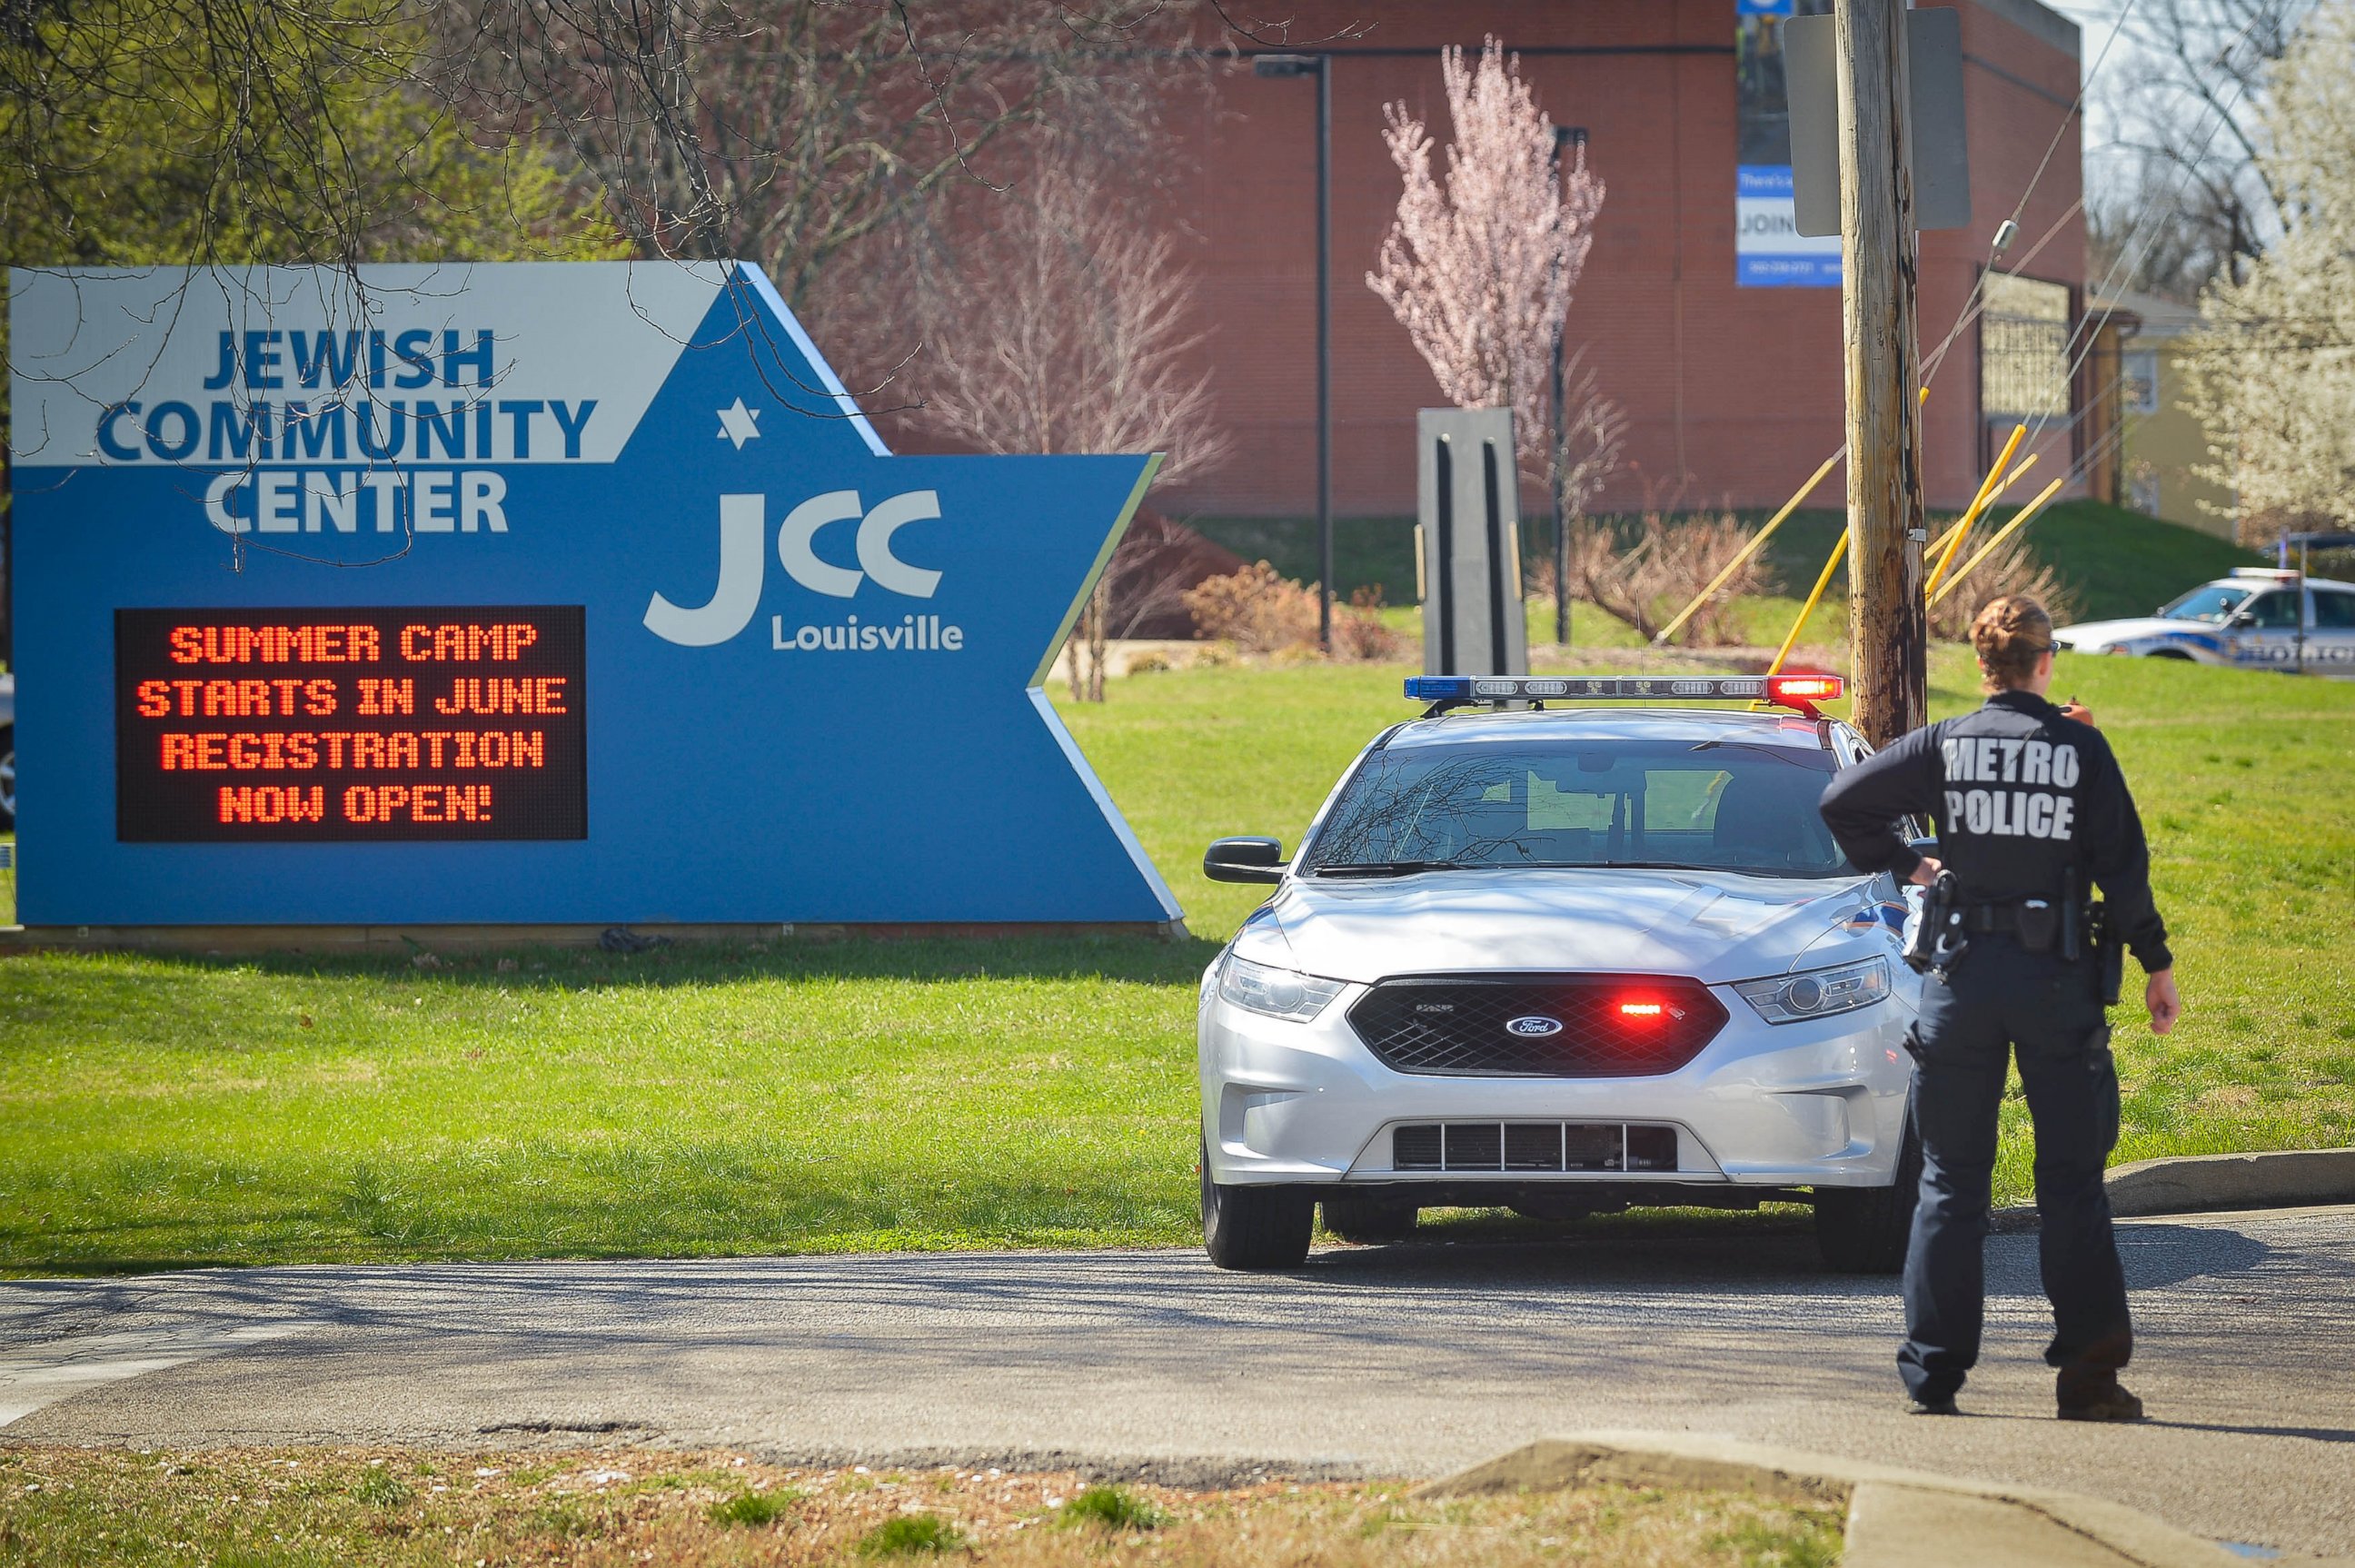 PHOTO: A police officer blocks an entrance as officials respond to a bomb threat at the Jewish Community Center in Louisville, Ky., March 8, 2017.  